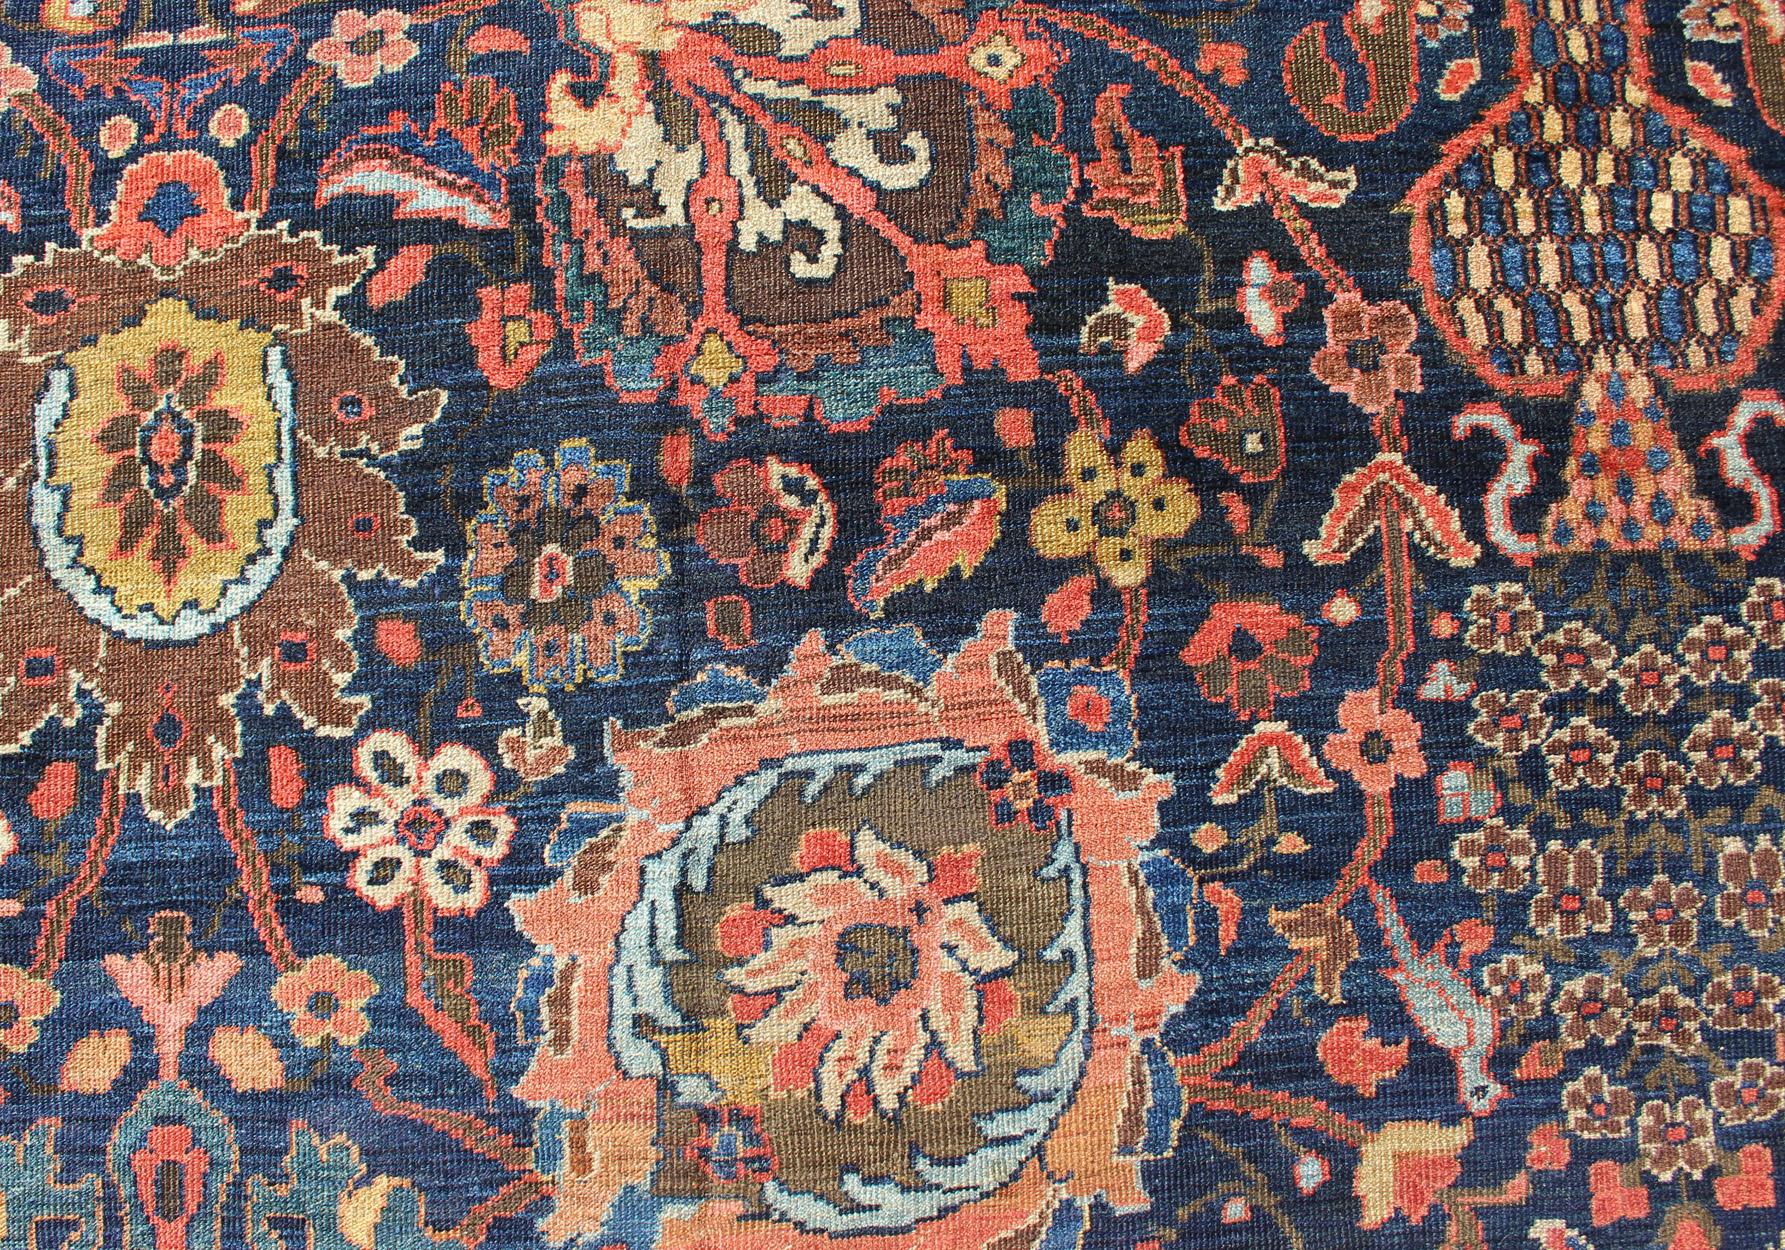 Exceptional Large Antique Sultanabad Rug in Midnight Blue and Coral Red In Good Condition For Sale In Atlanta, GA